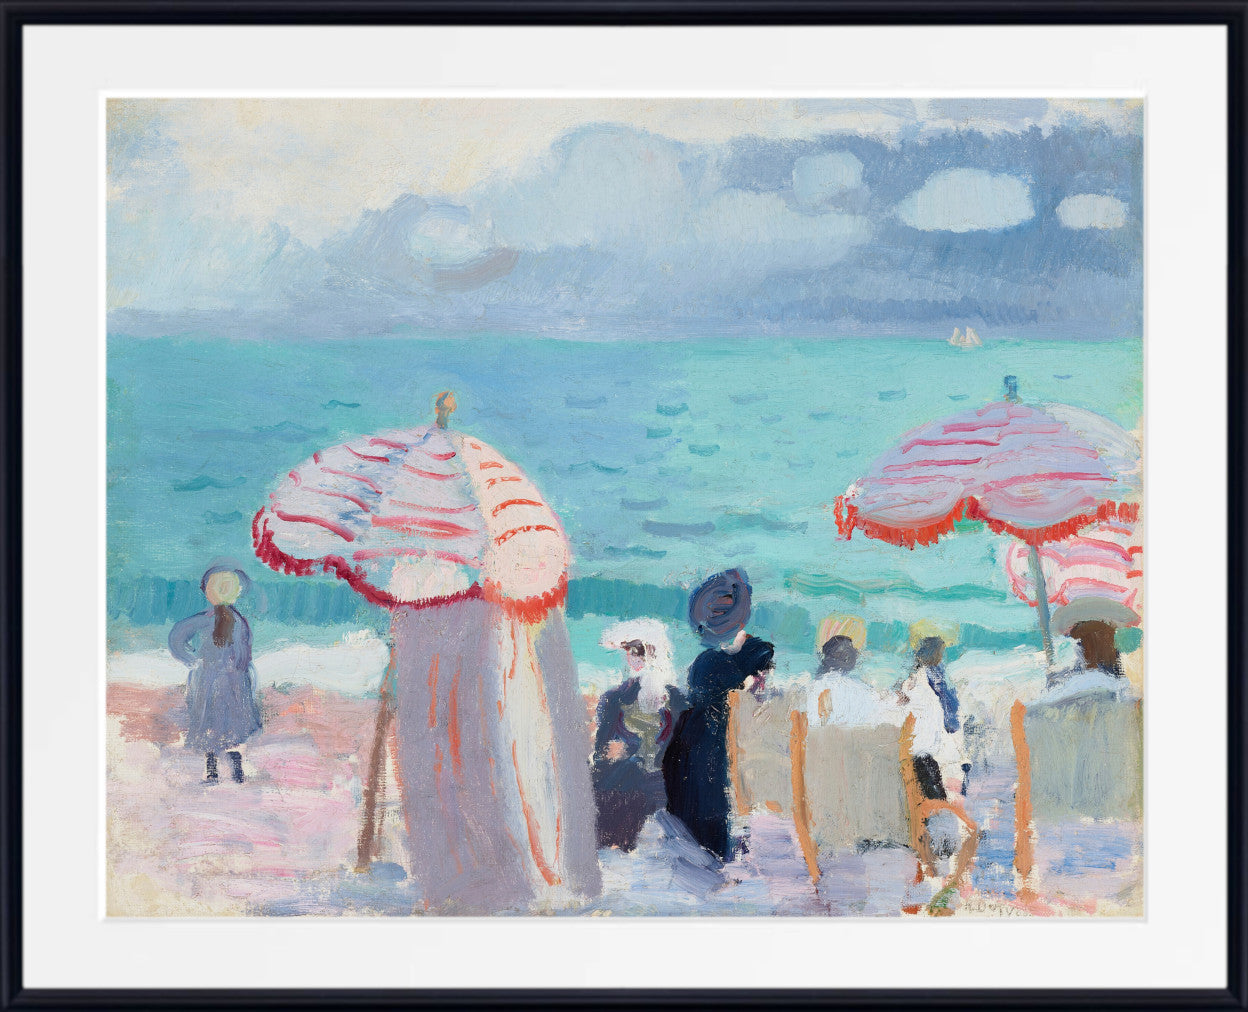 The Parasols (1905) by Raoul Dufy